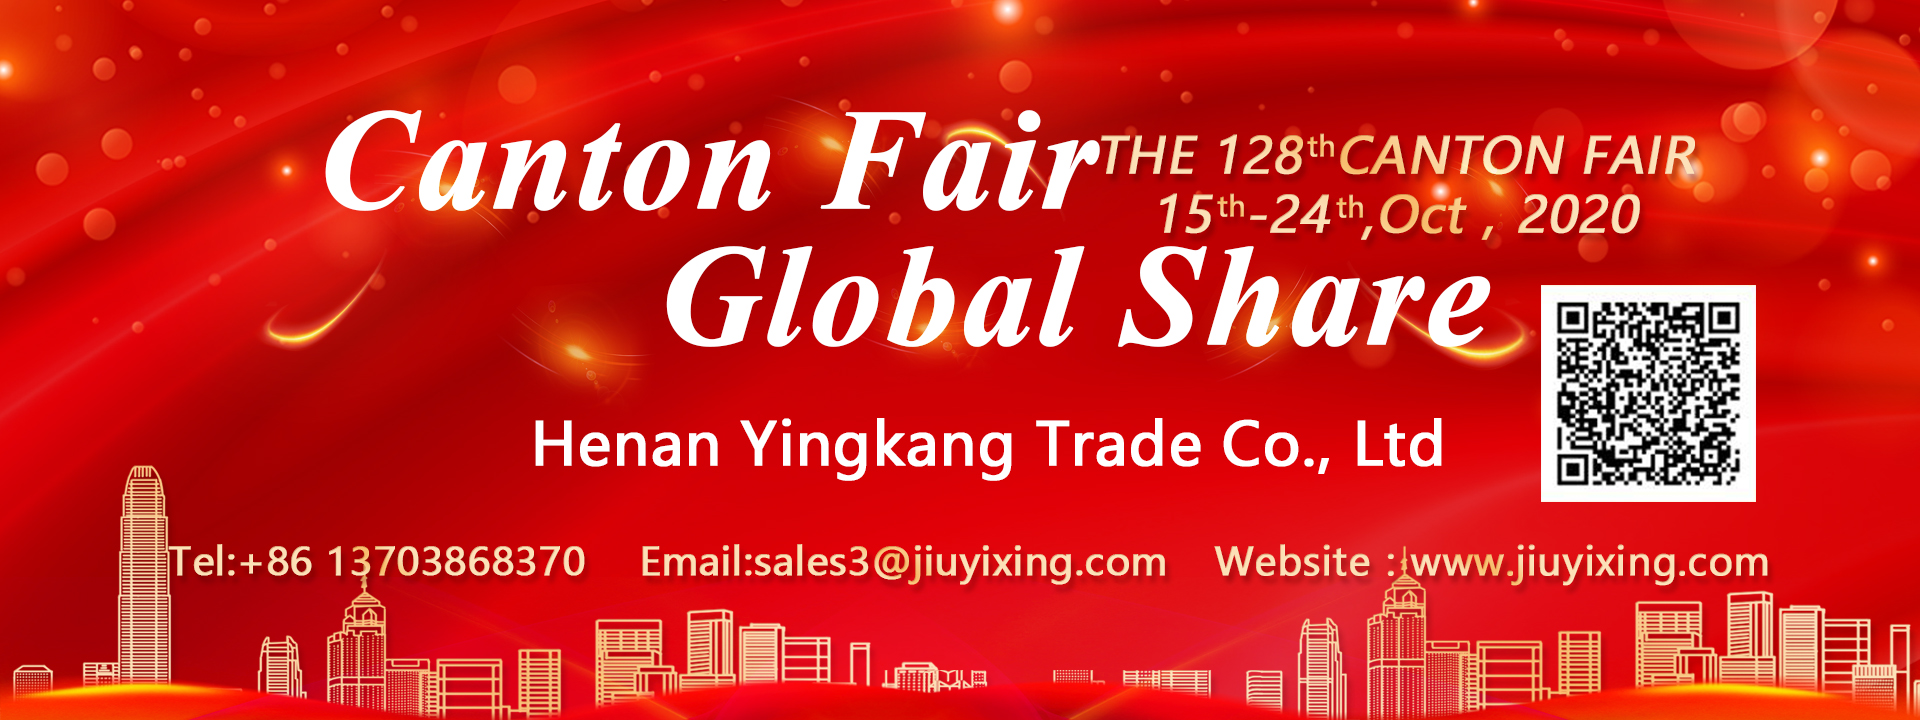  We'll wait for you at the 128th Canton Fair